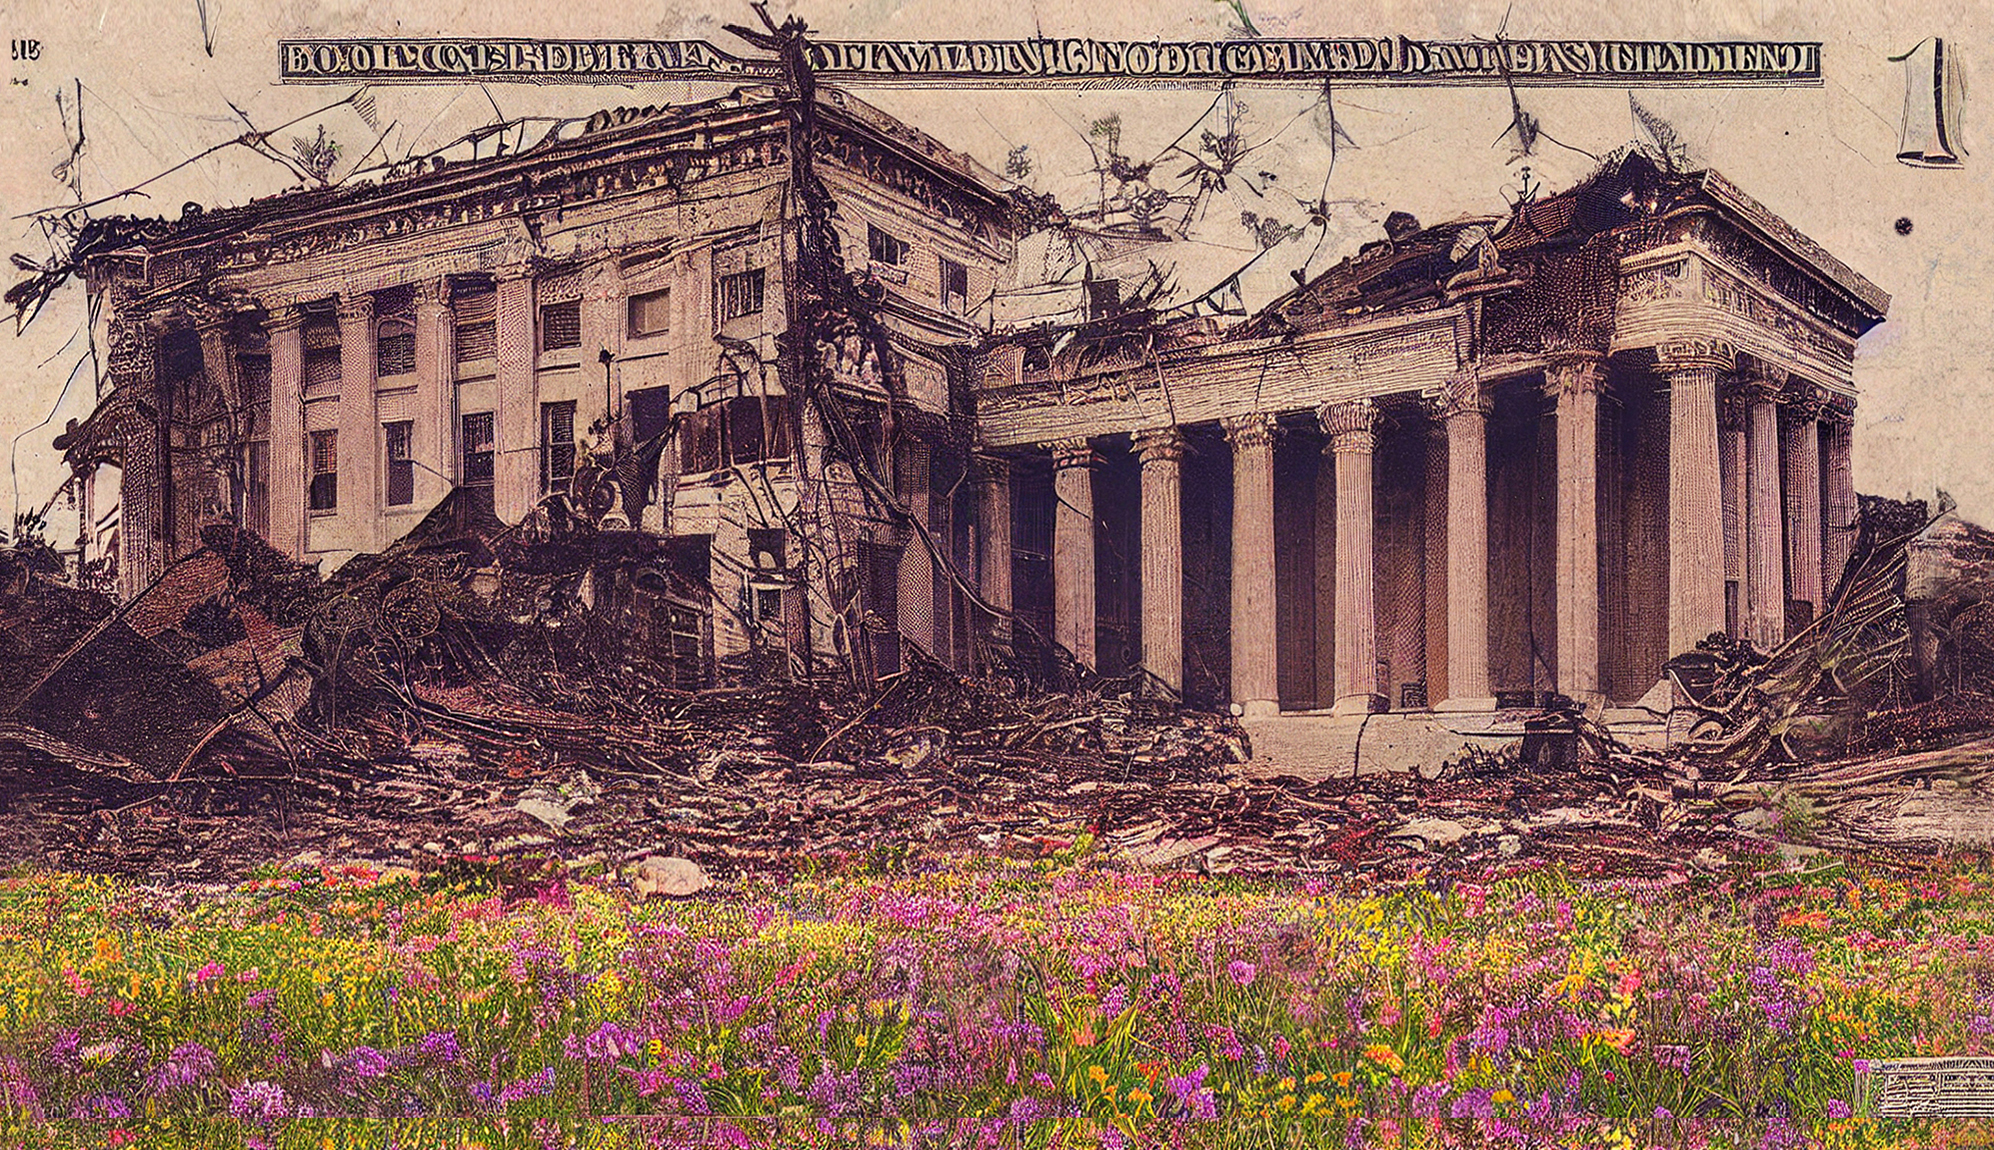 Image of a collapsing building with pillars surrounded by rubble. In front is a grassy meadow of purple and yellow flowers.